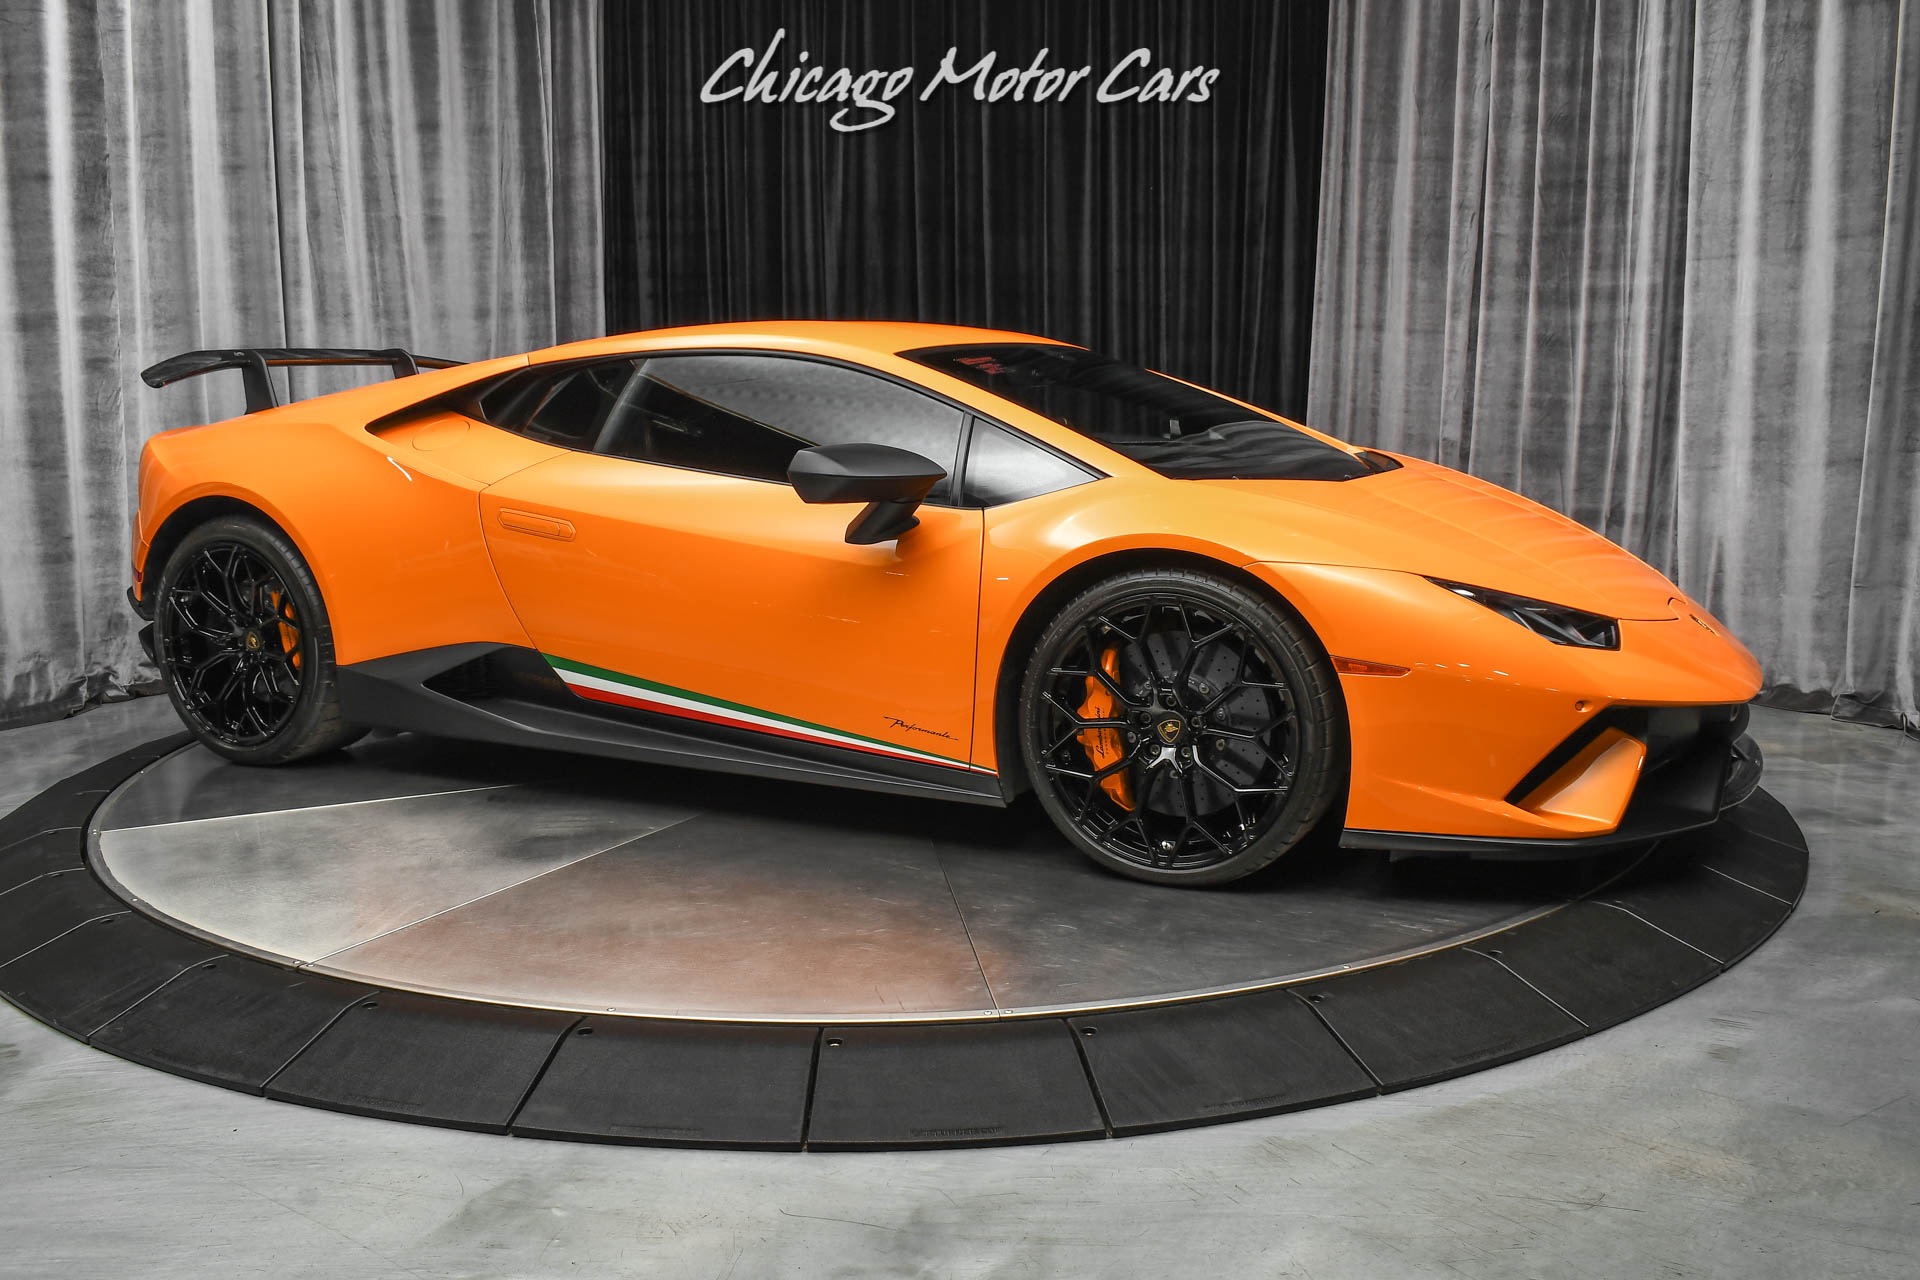 Used-2018-Lamborghini-Huracan-Performante-LP640-4-Coupe-HEFFNER-Twin-Turbo-1500WHP-Built-Everything